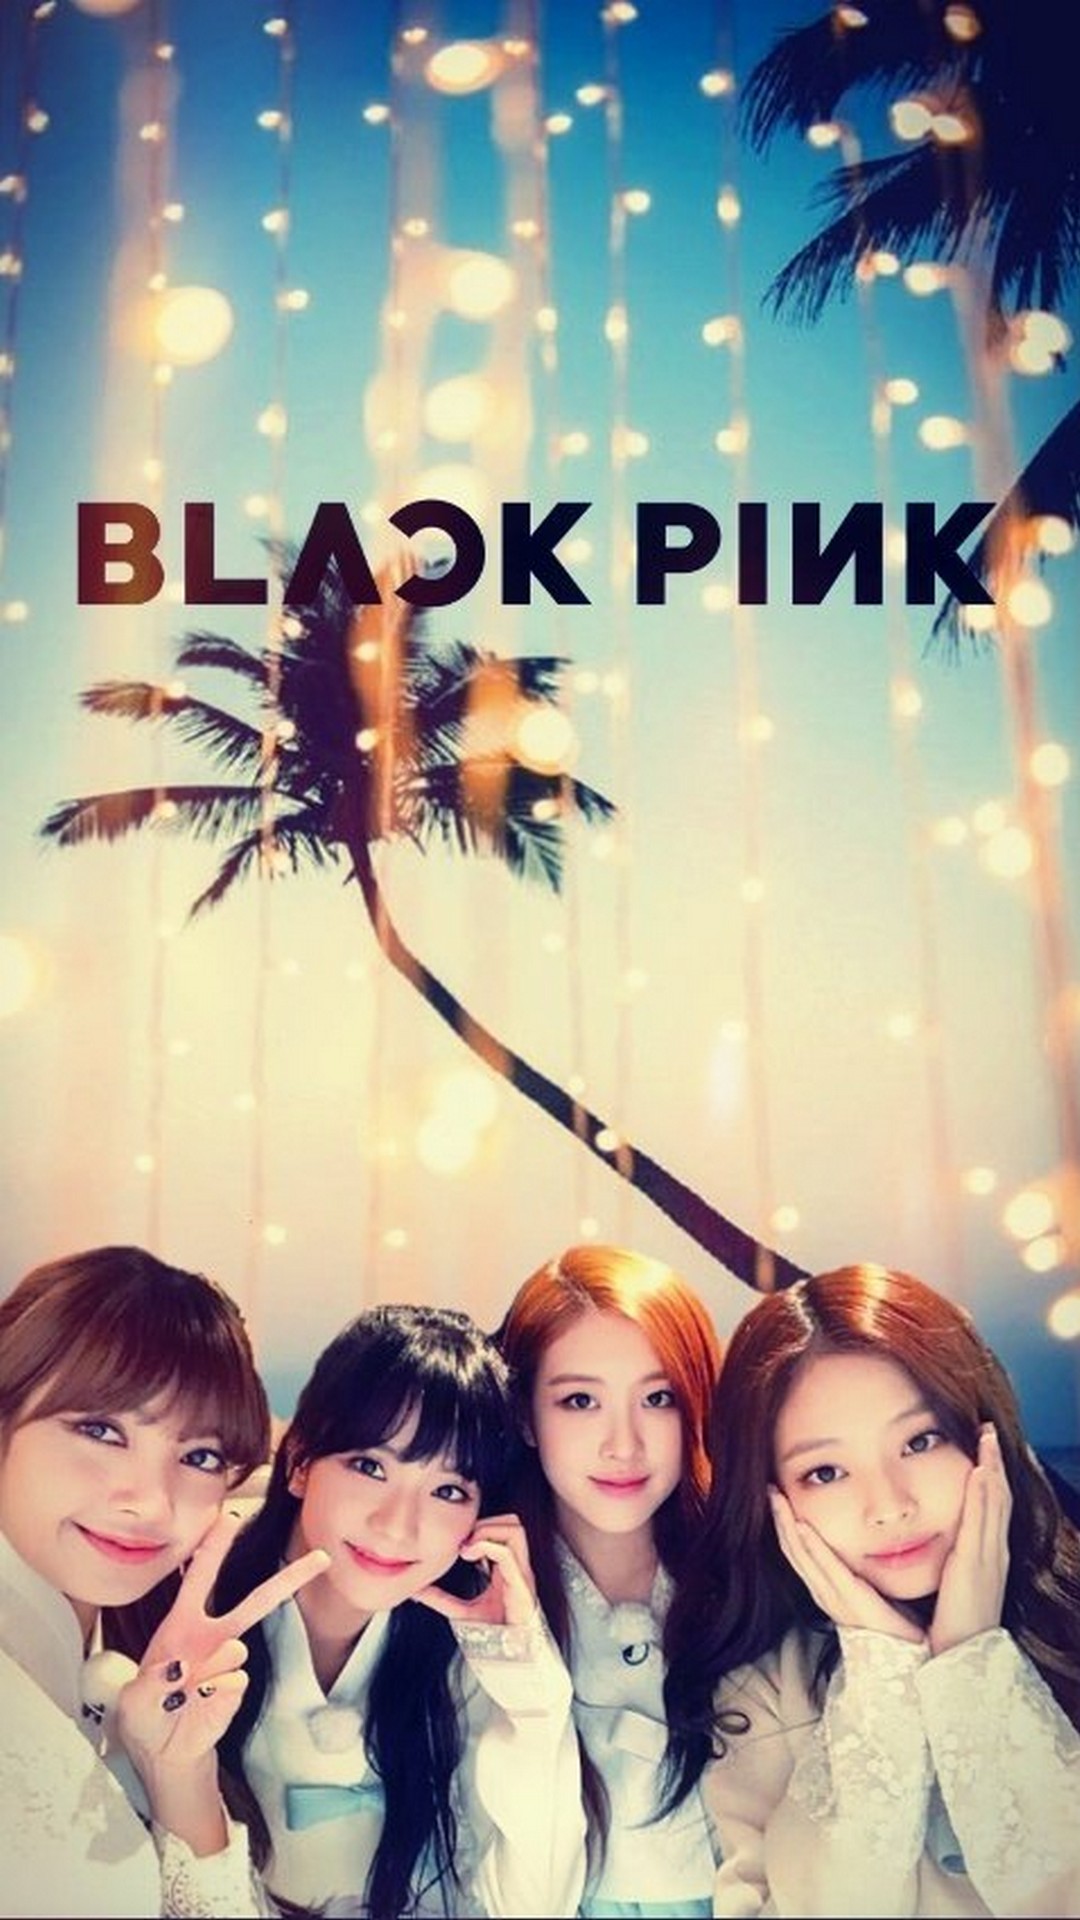 K-POP Blackpink iPhone Wallpaper HD With high-resolution 1080X1920 pixel. You can set as wallpaper for Apple iPhone X, XS Max, XR, 8, 7, 6, SE, iPad. Enjoy and share your favorite HD wallpapers and background images